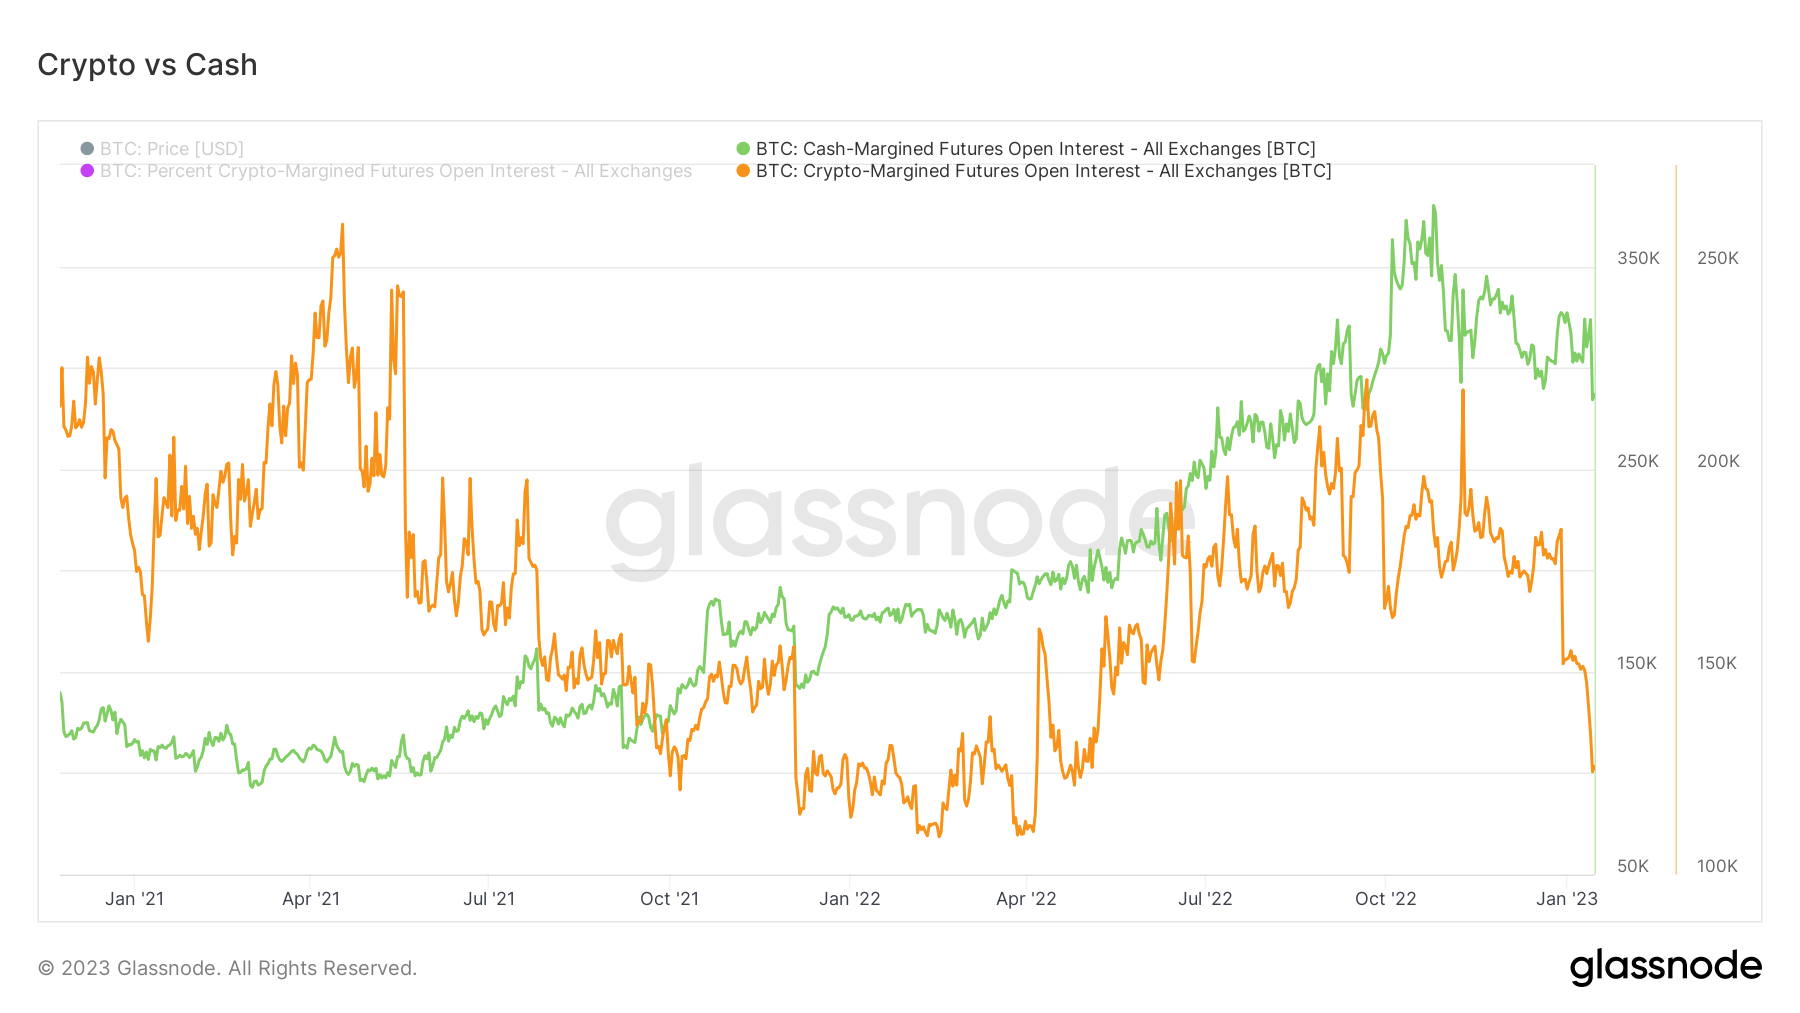 Bitcoin: All-time low, 29% in crypto-margin futures open interest, suggests risk-off environment